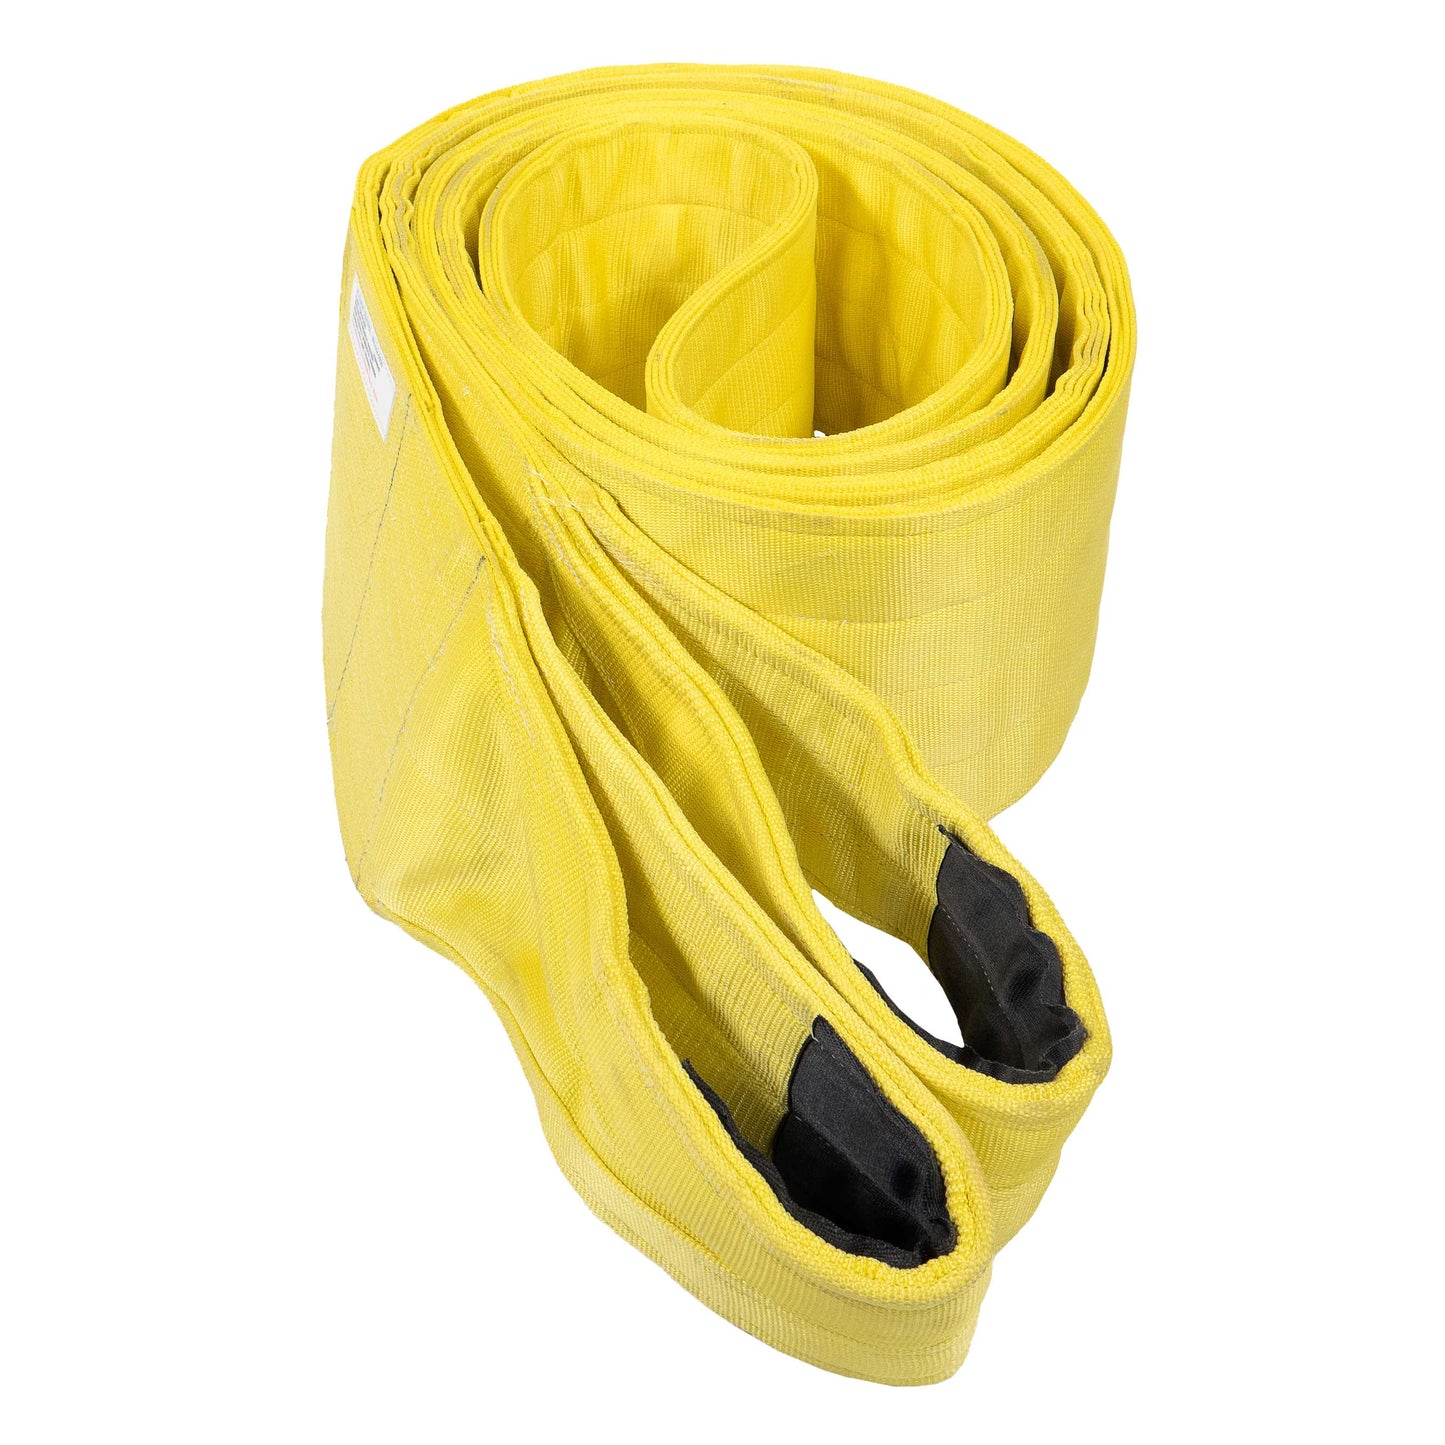 12" x 30' Heavy Duty Recovery Strap with Reinforced Cordura Eyes - 4 Ply | 134,250 WLL